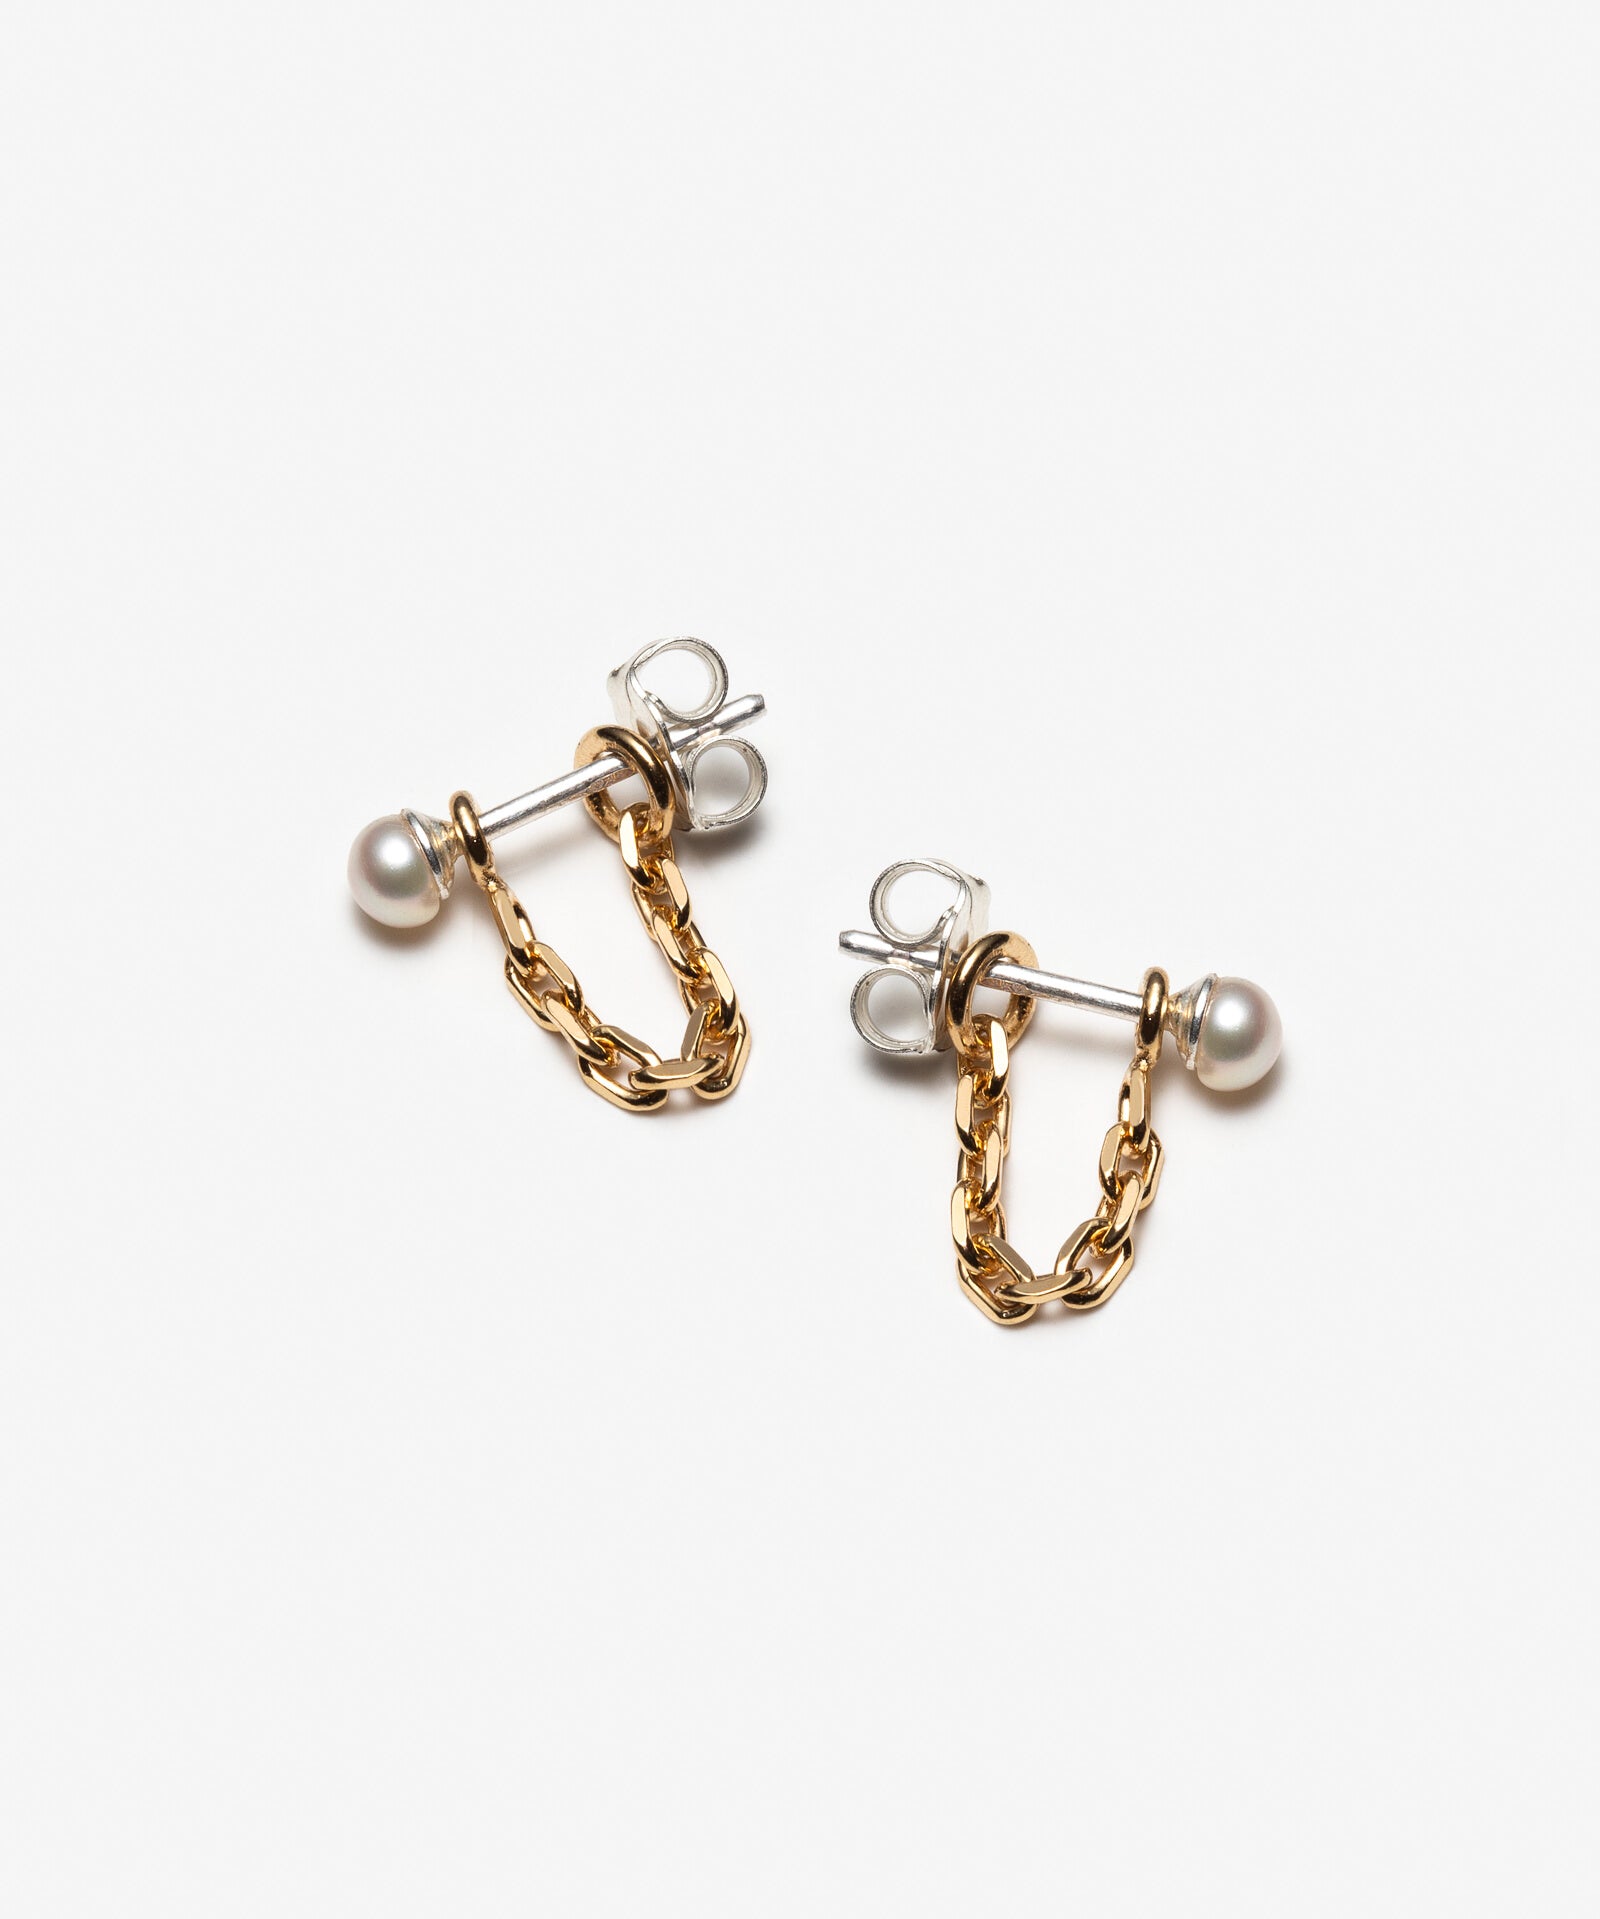 Gold Chain Earrings With Dainty Freshwater Pearl Studs